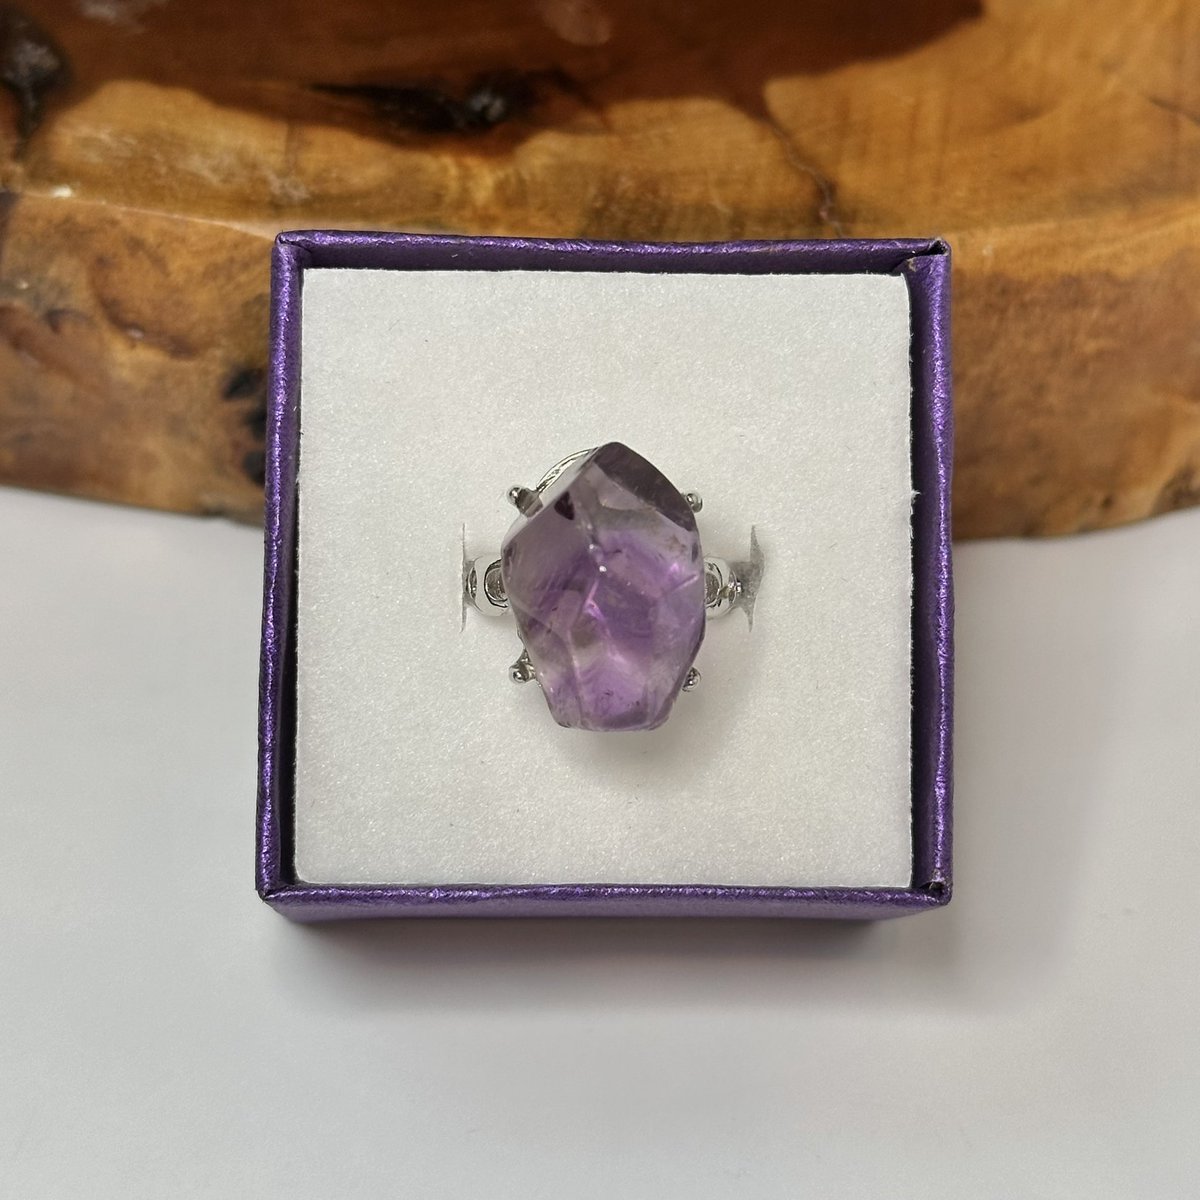 Ametrine Ring 💜✨

This stone is a combination of Amethyst and Citrine. Ametrine brings a balance of both stones promoting optimism, abundance, and tranquility. 

#crystals #crystalhealing #crystal #gemstones #healing #crystallove #healingcrystals #crystaljewelry